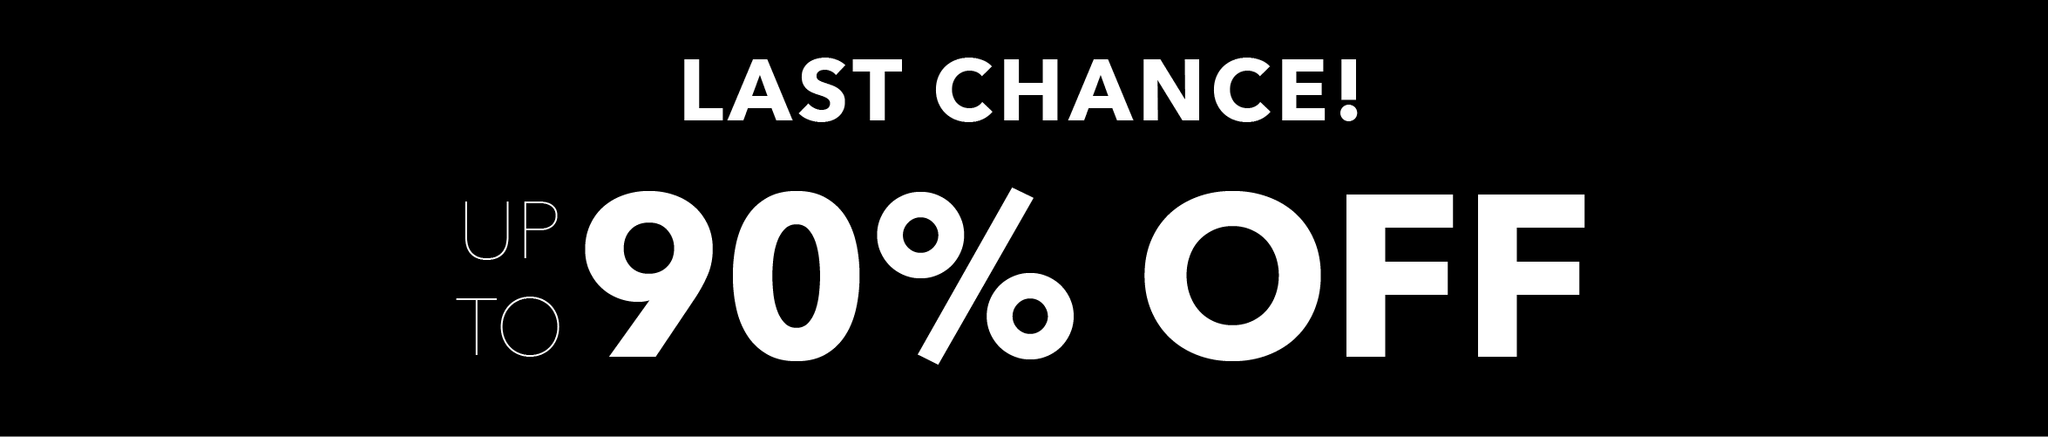 LAST CHANCE up to 90% off